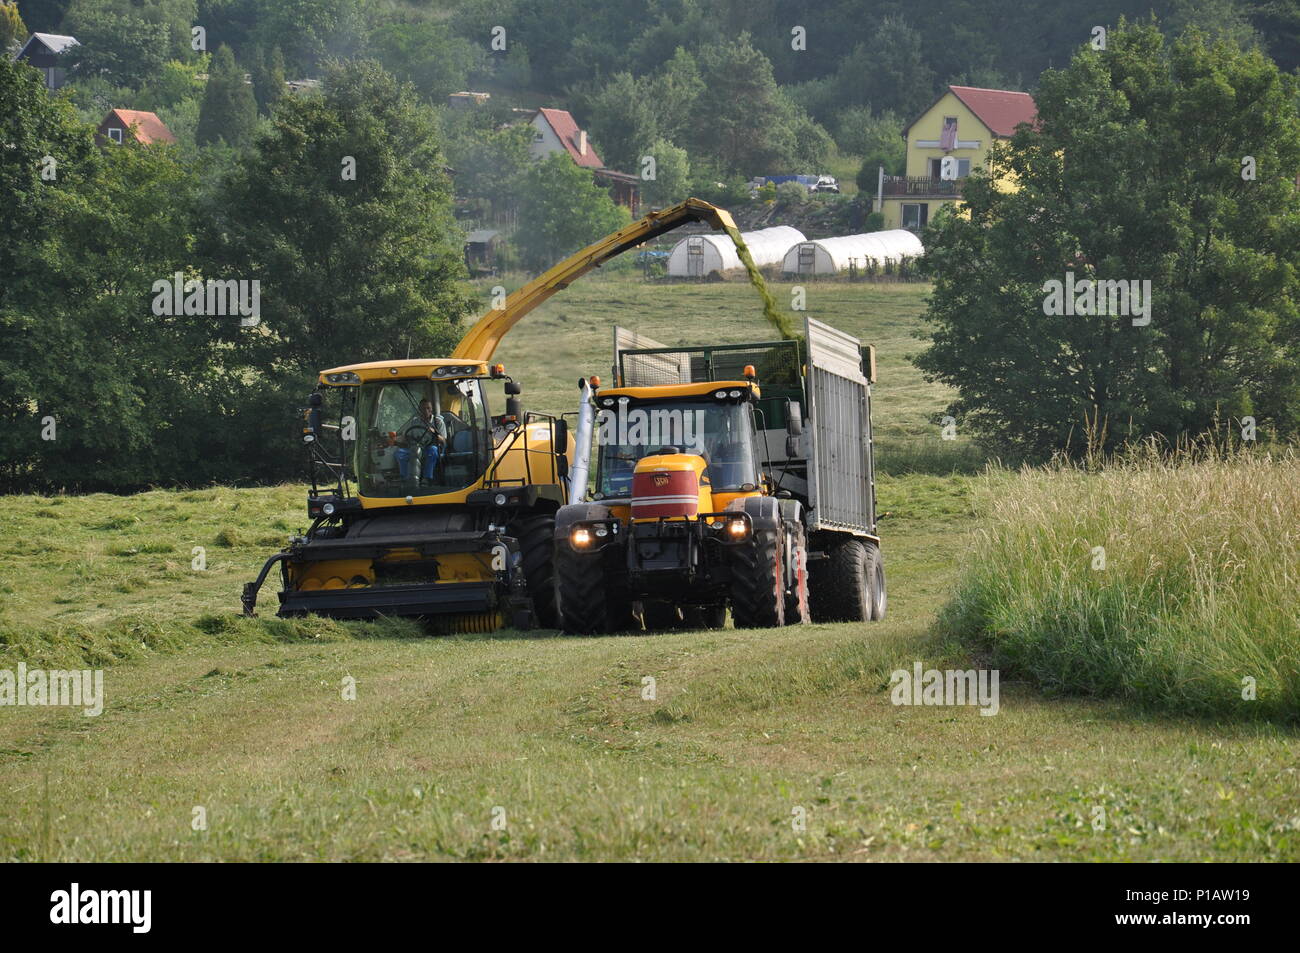 Mechanization in agriculture, technology, work Stock Photo